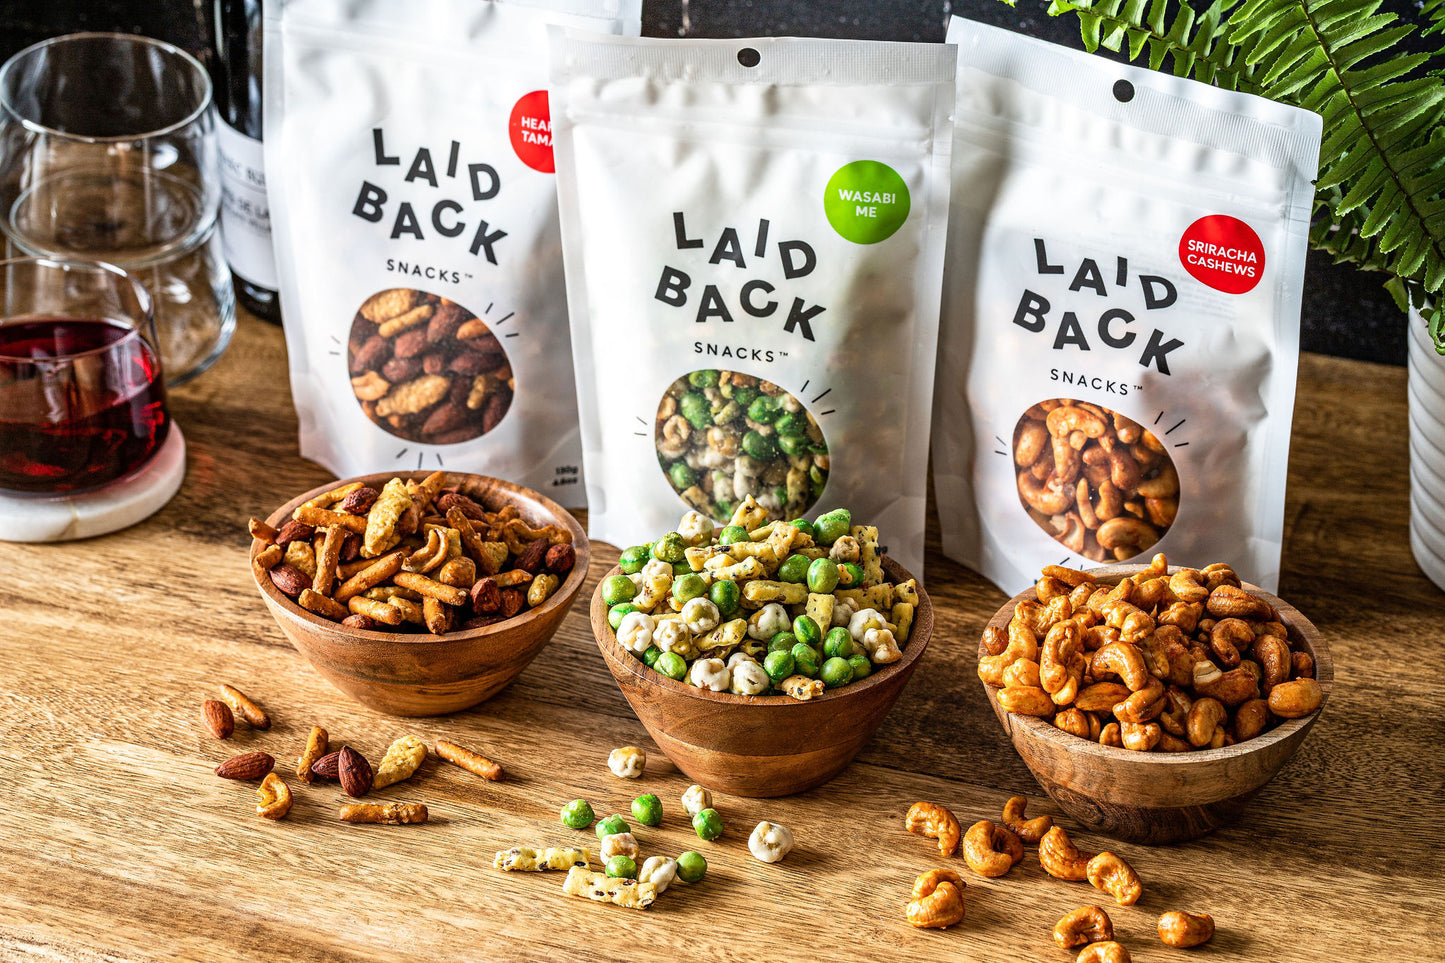 Laid Back Snacks - Small Business Feature | September 2021